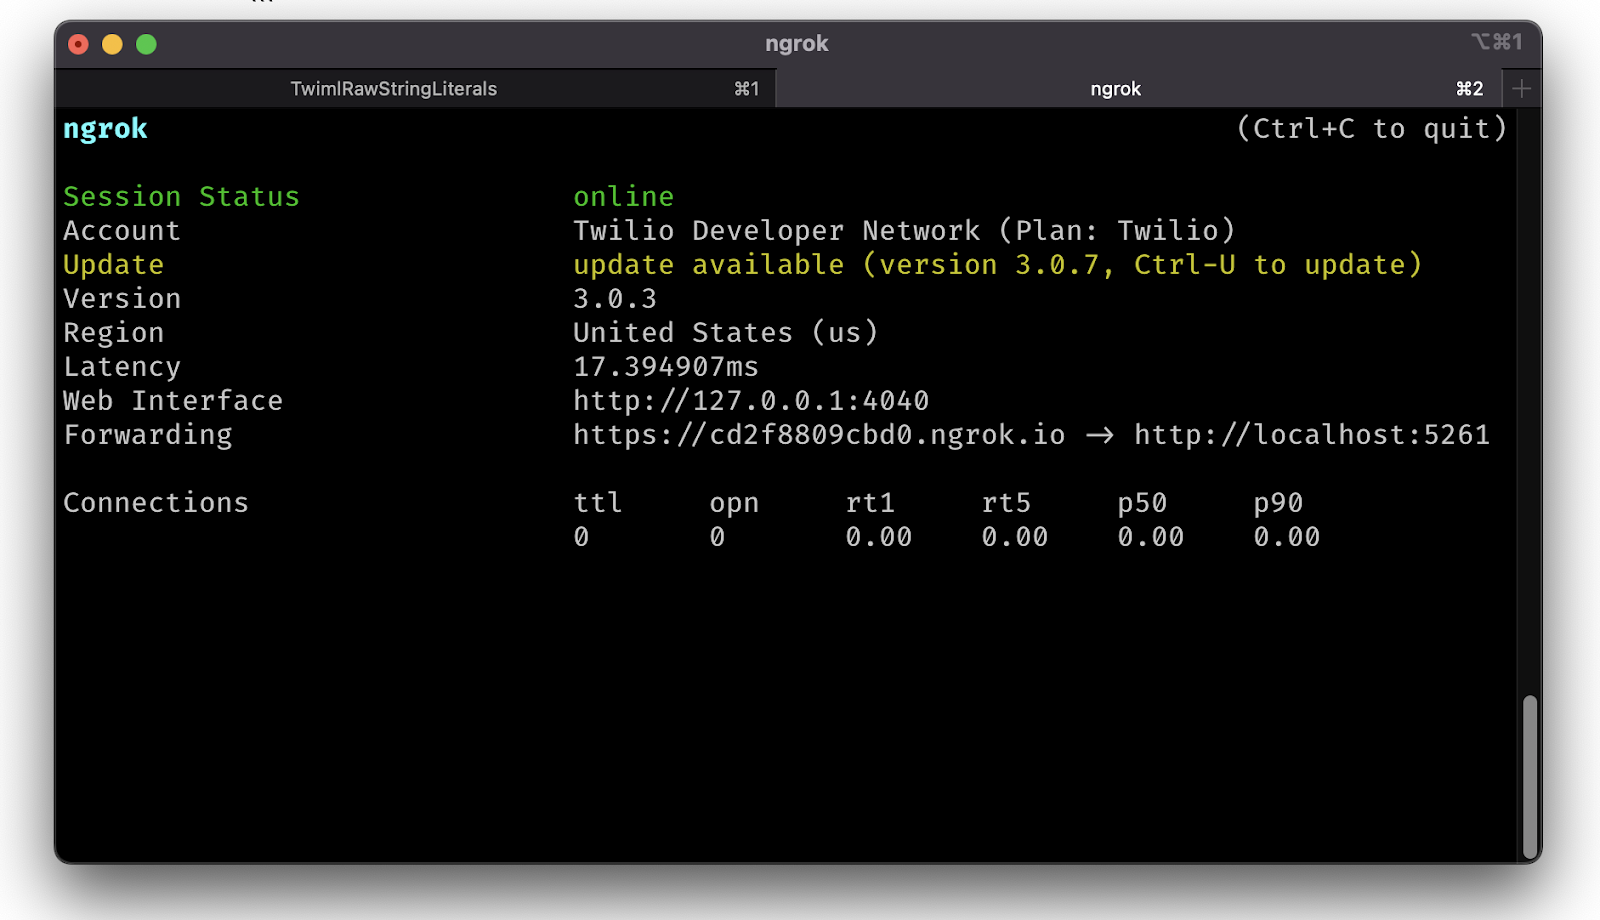 ngrok http command output showing information about the secure tunnel, most importantly the public forwarding URLs